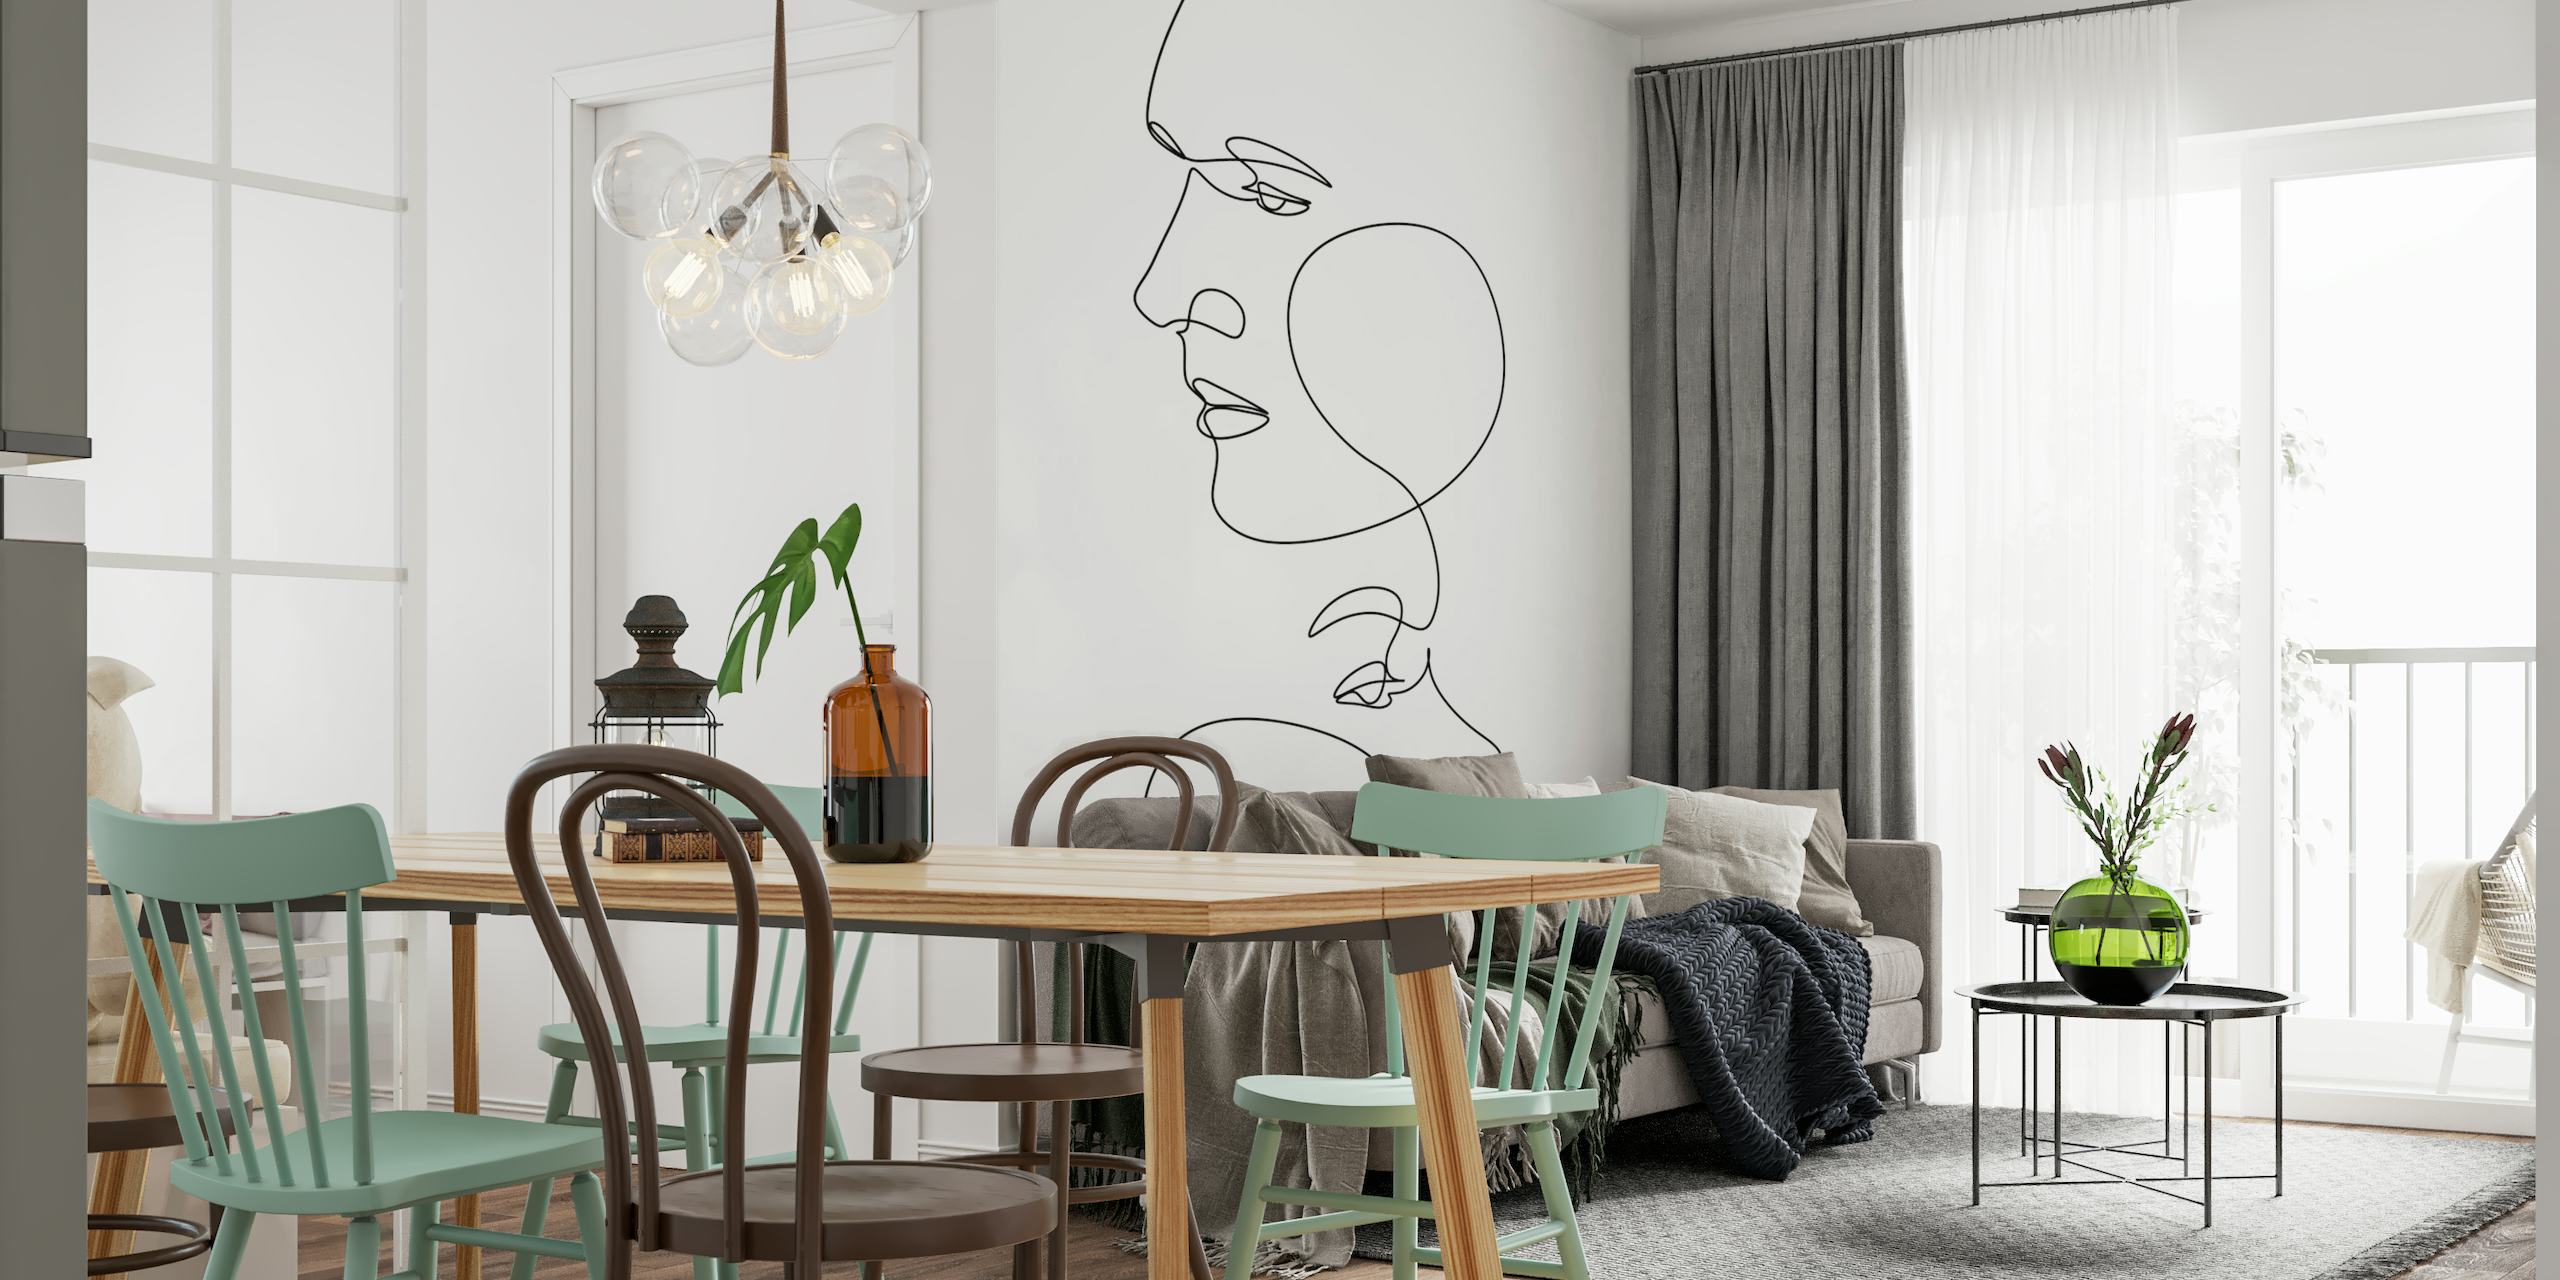 Modern man and woman line art design wallpaper for a sophisticated interior transformation